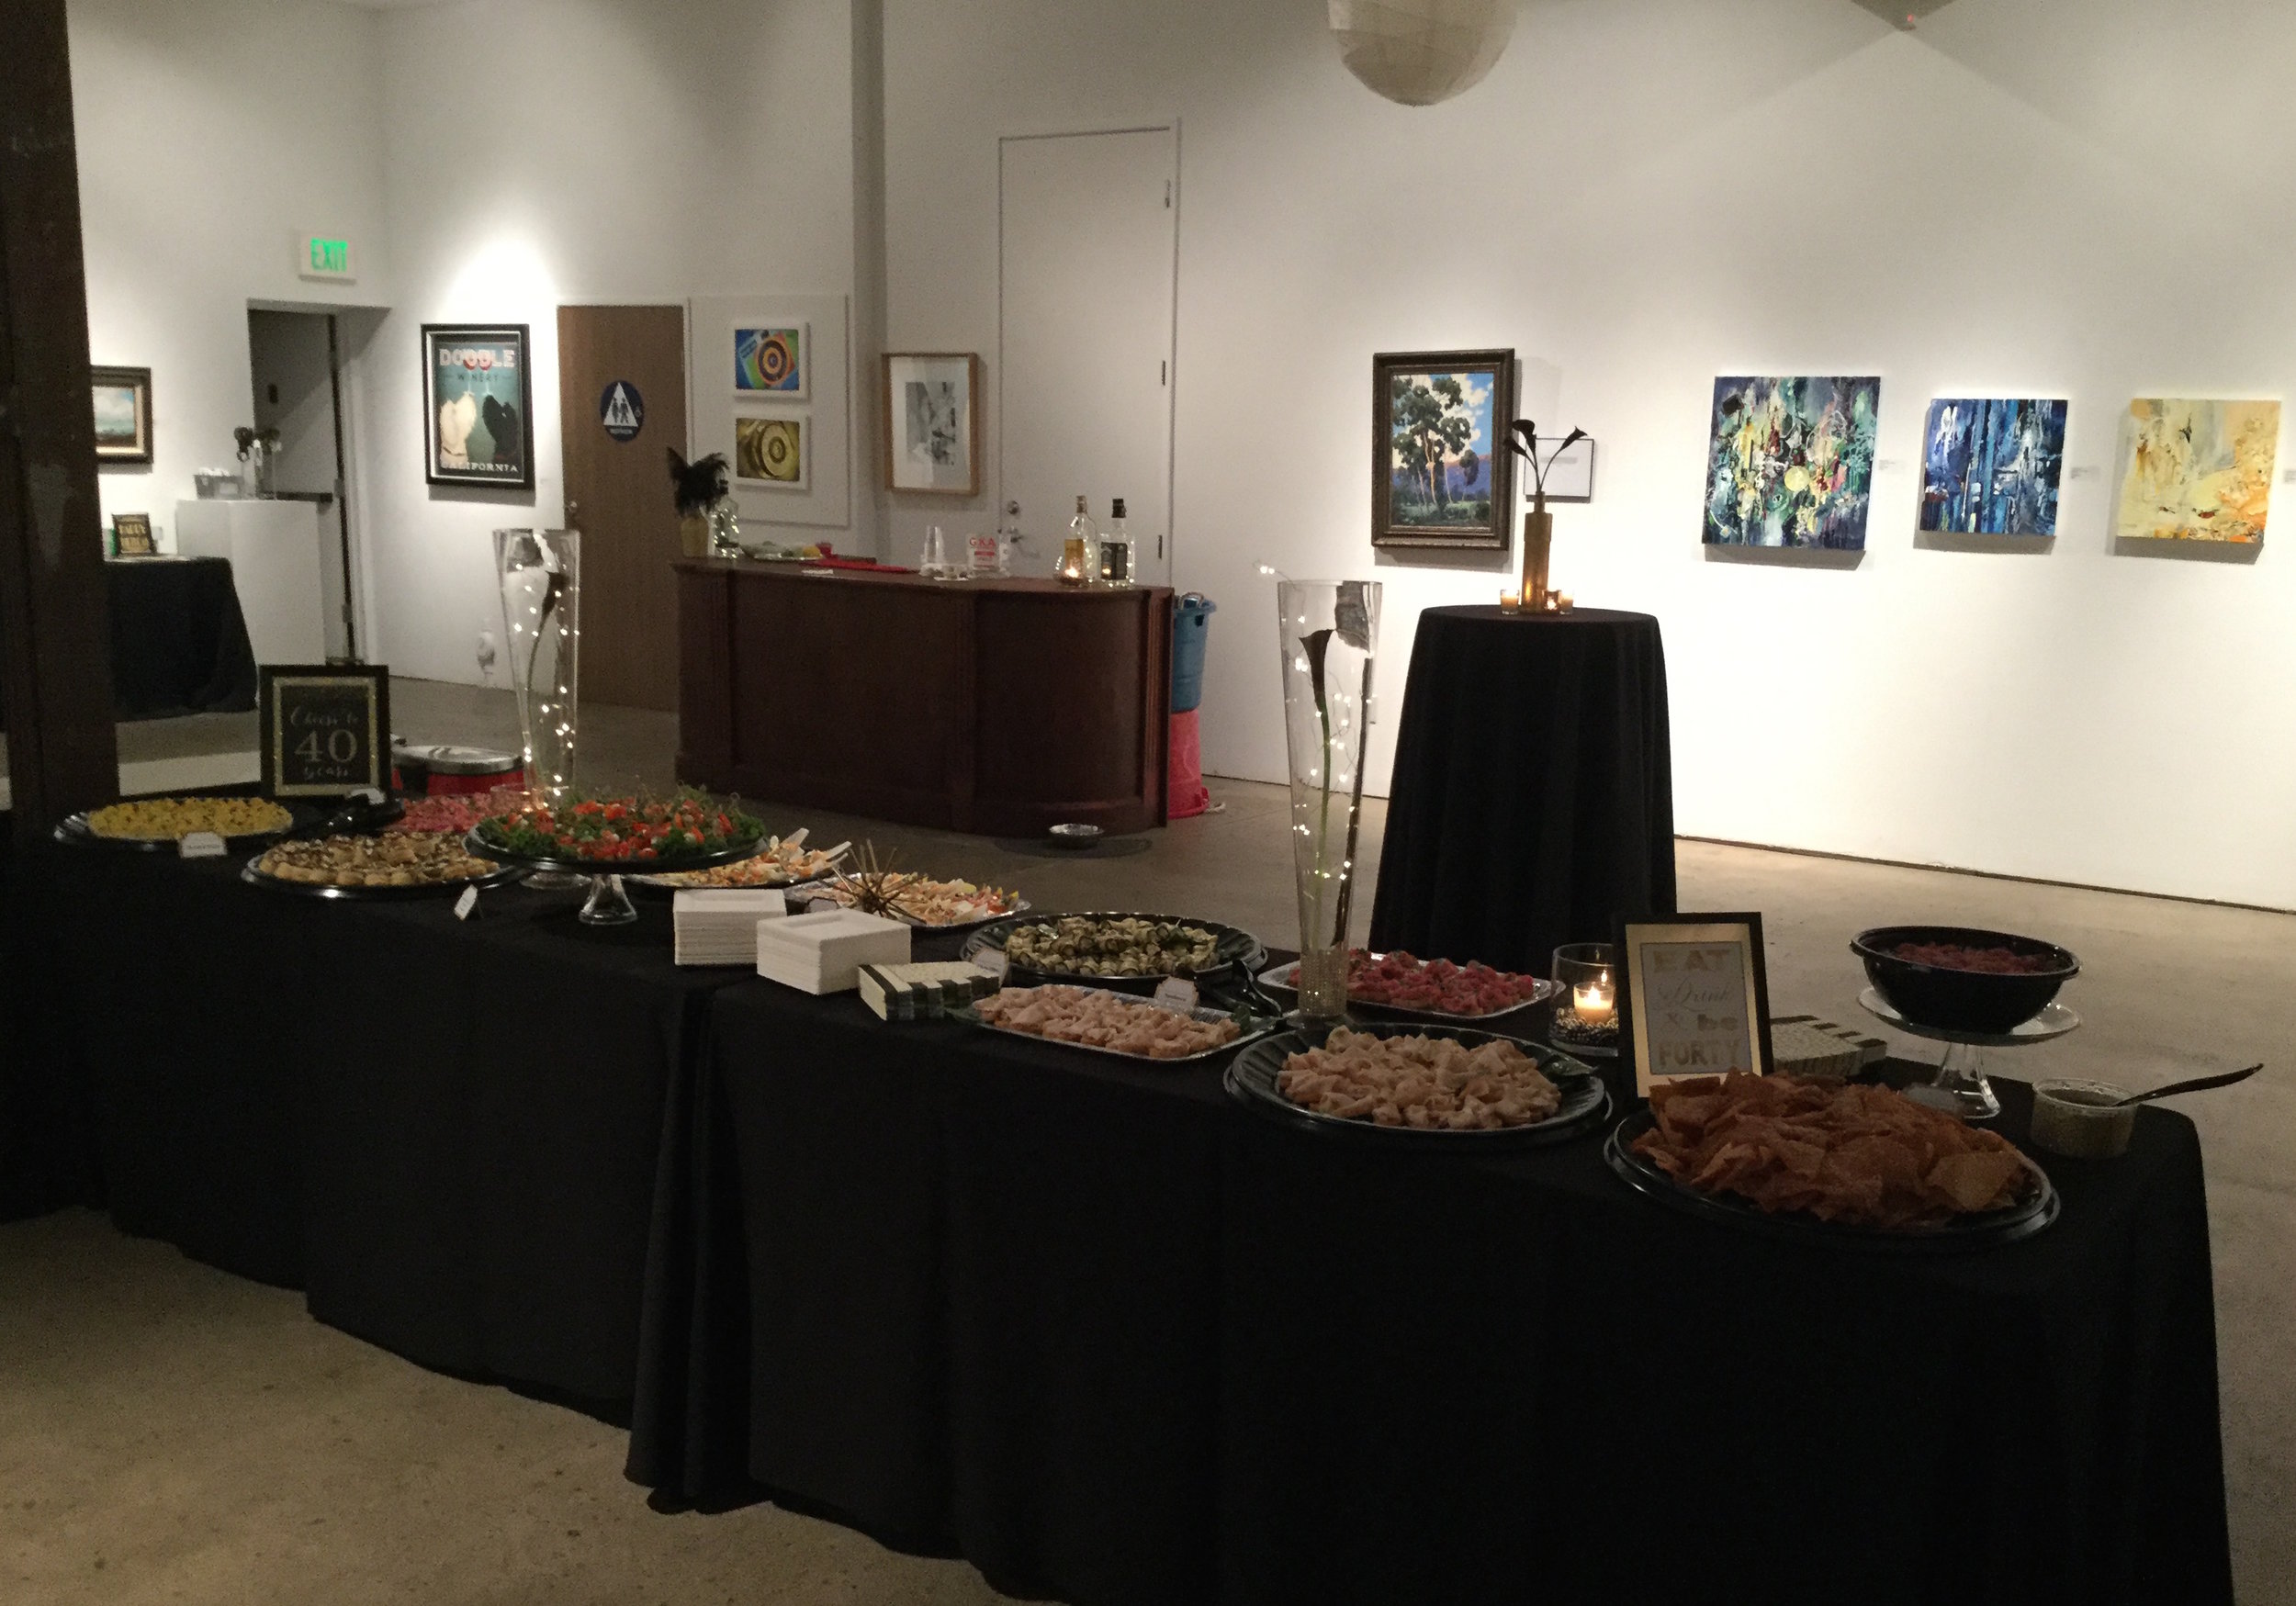  40th Birthday   Venue:  The Liberty Art Gallery &amp; Event Space, Long Beach   Over The Moon Package: &nbsp;Full Design, Planning, &amp; Coordination 